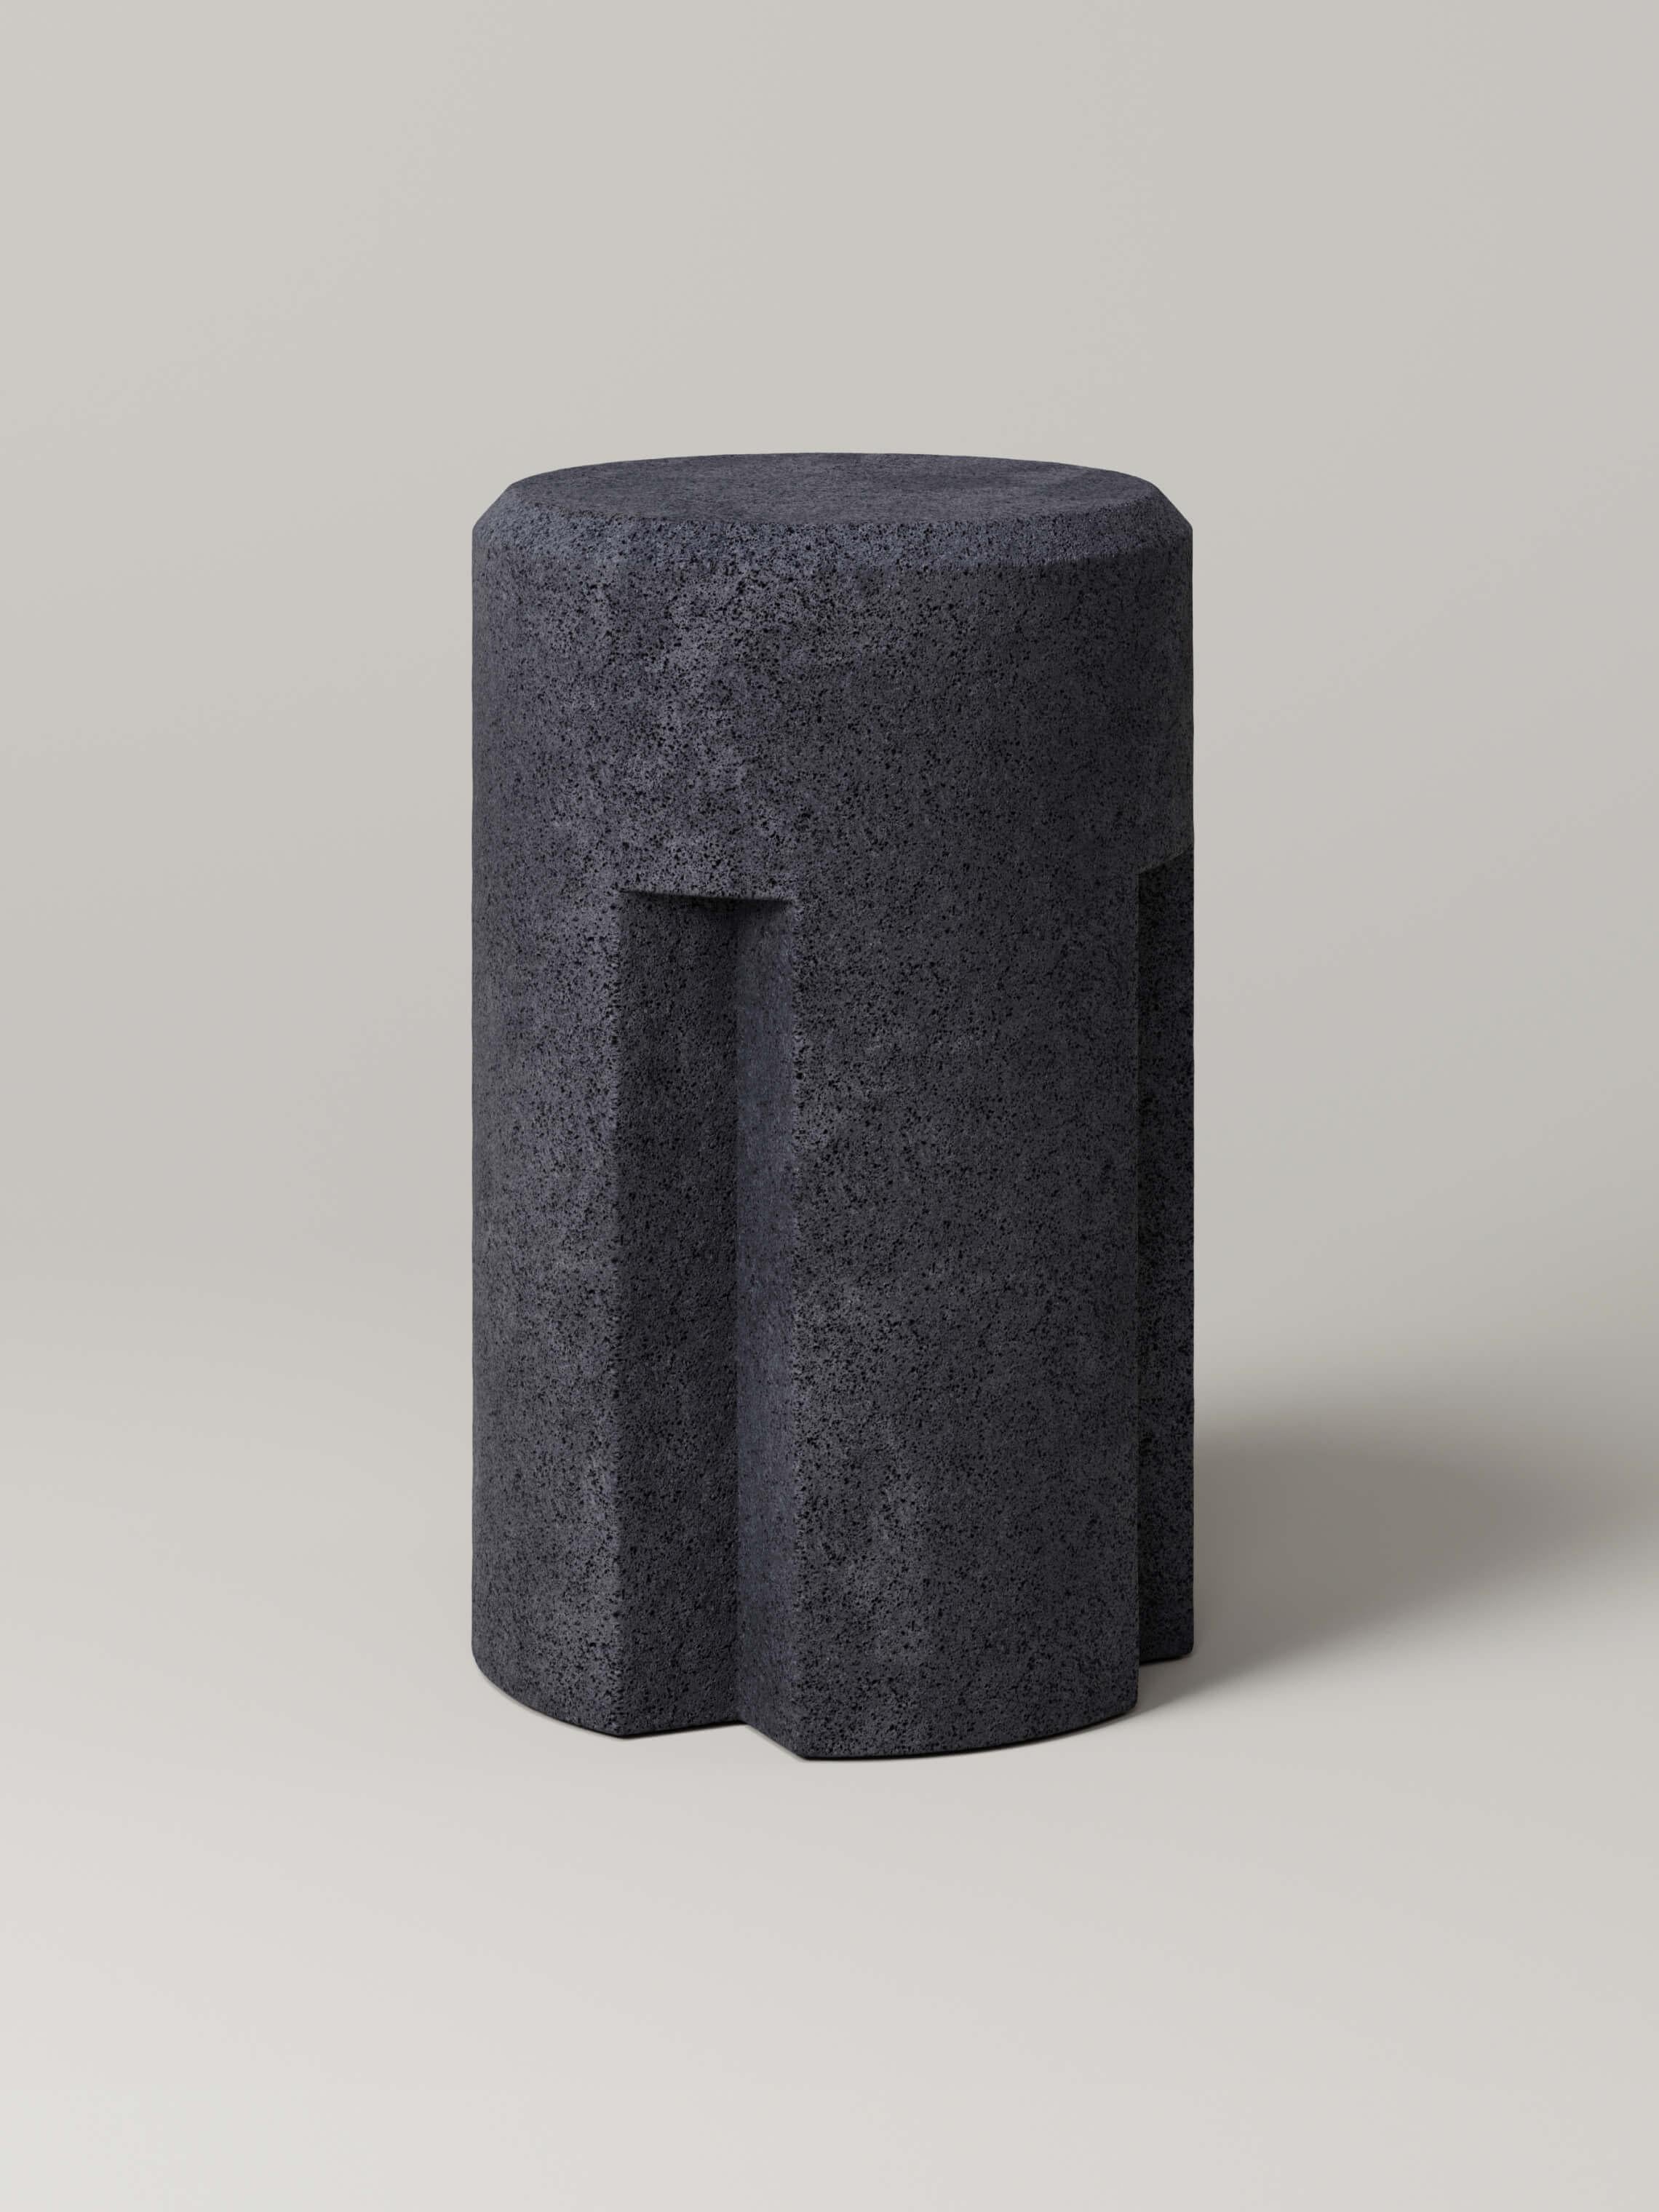 M_003 Counter Stool designed by Studio Le Cann for Monolith Studio, Travertine For Sale 2